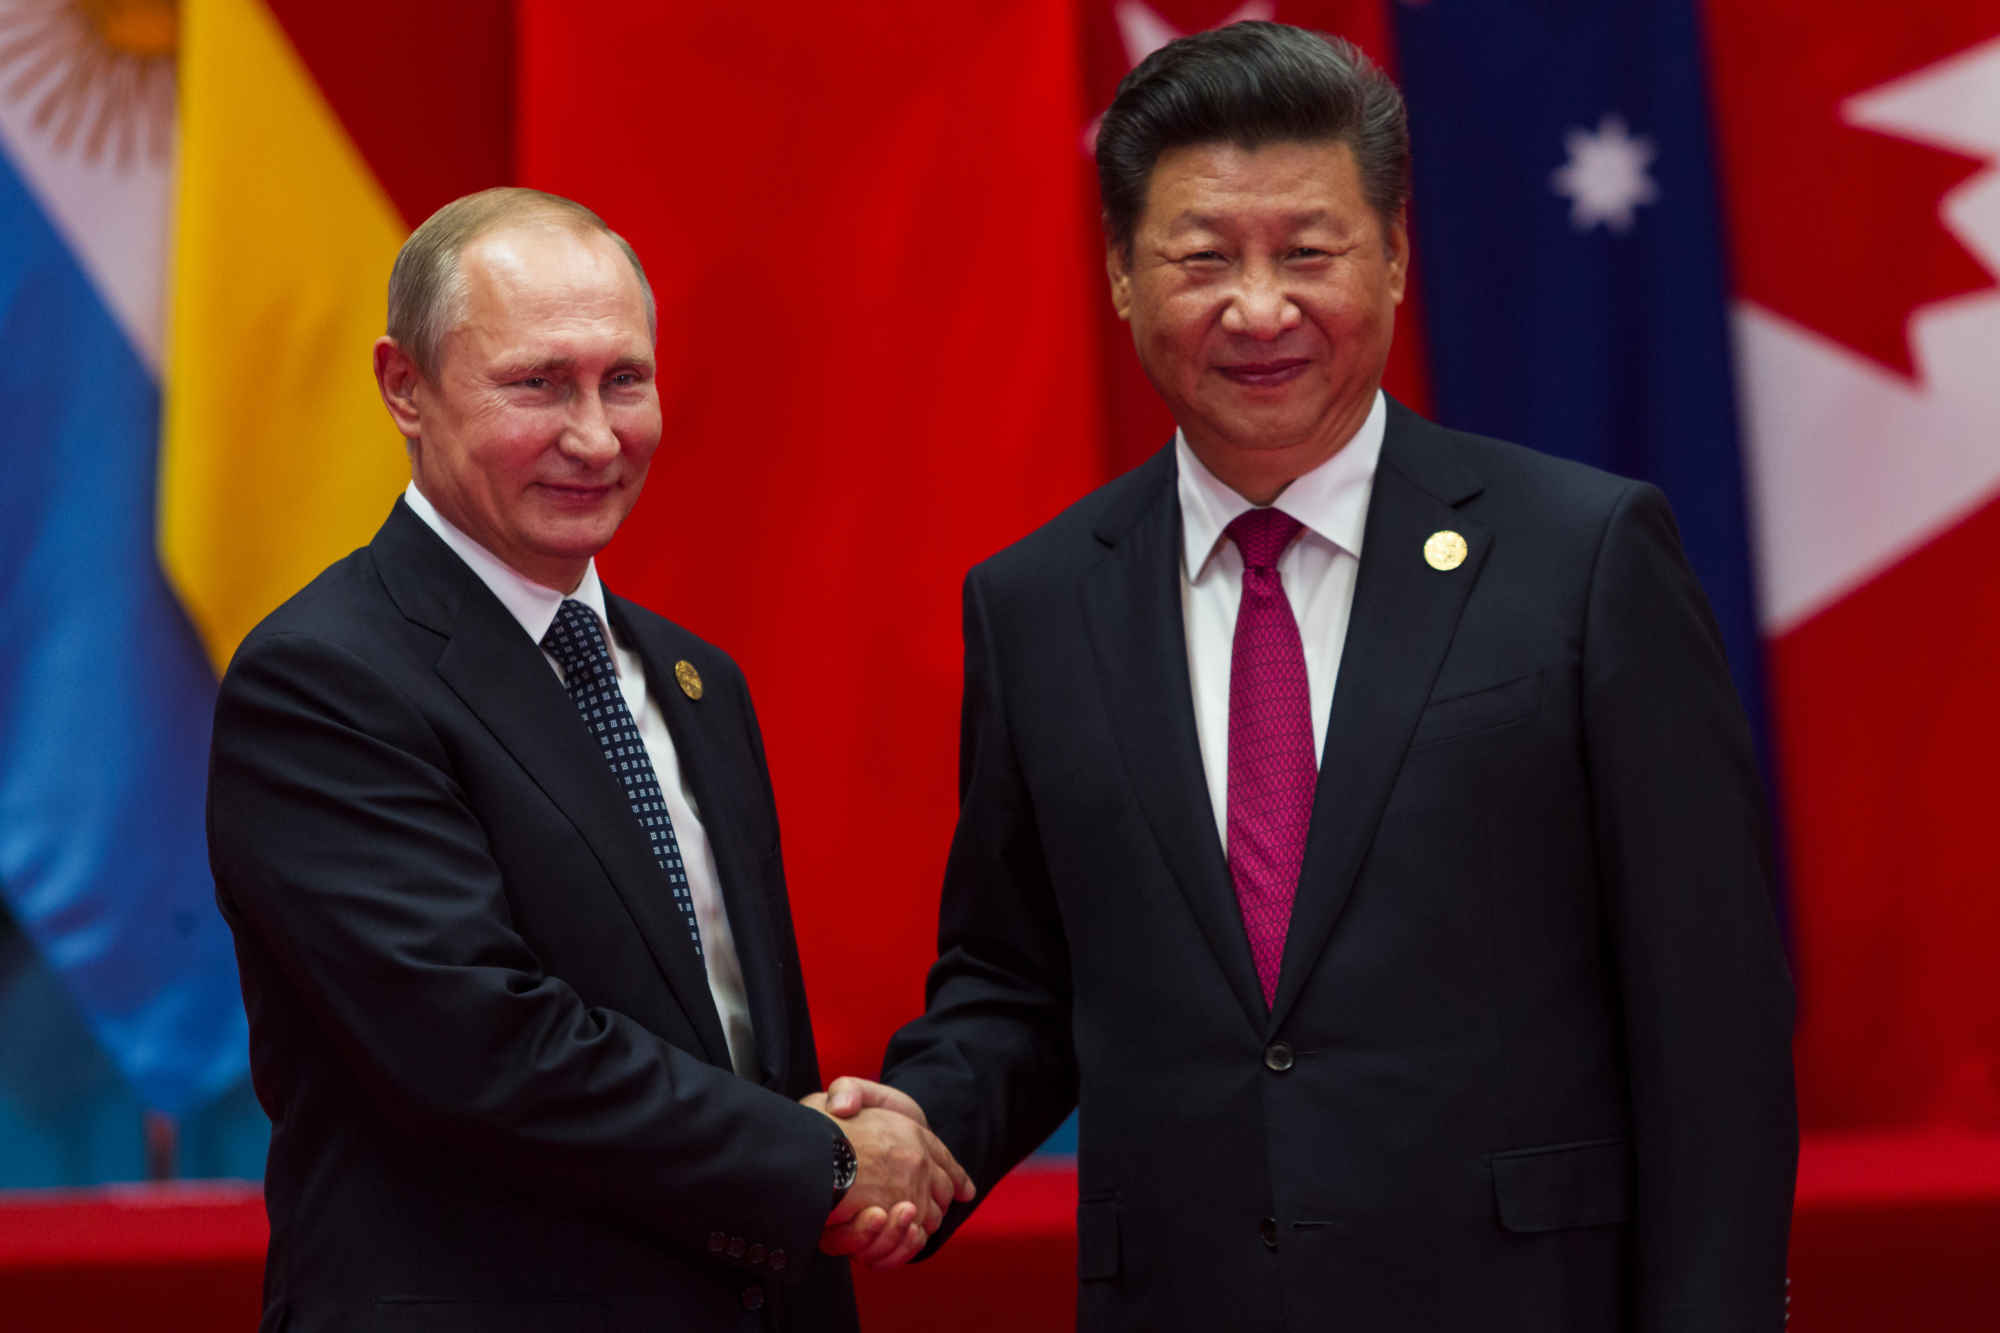 What Does Putin's Invasion of Ukraine Mean for China-Russia Relations?